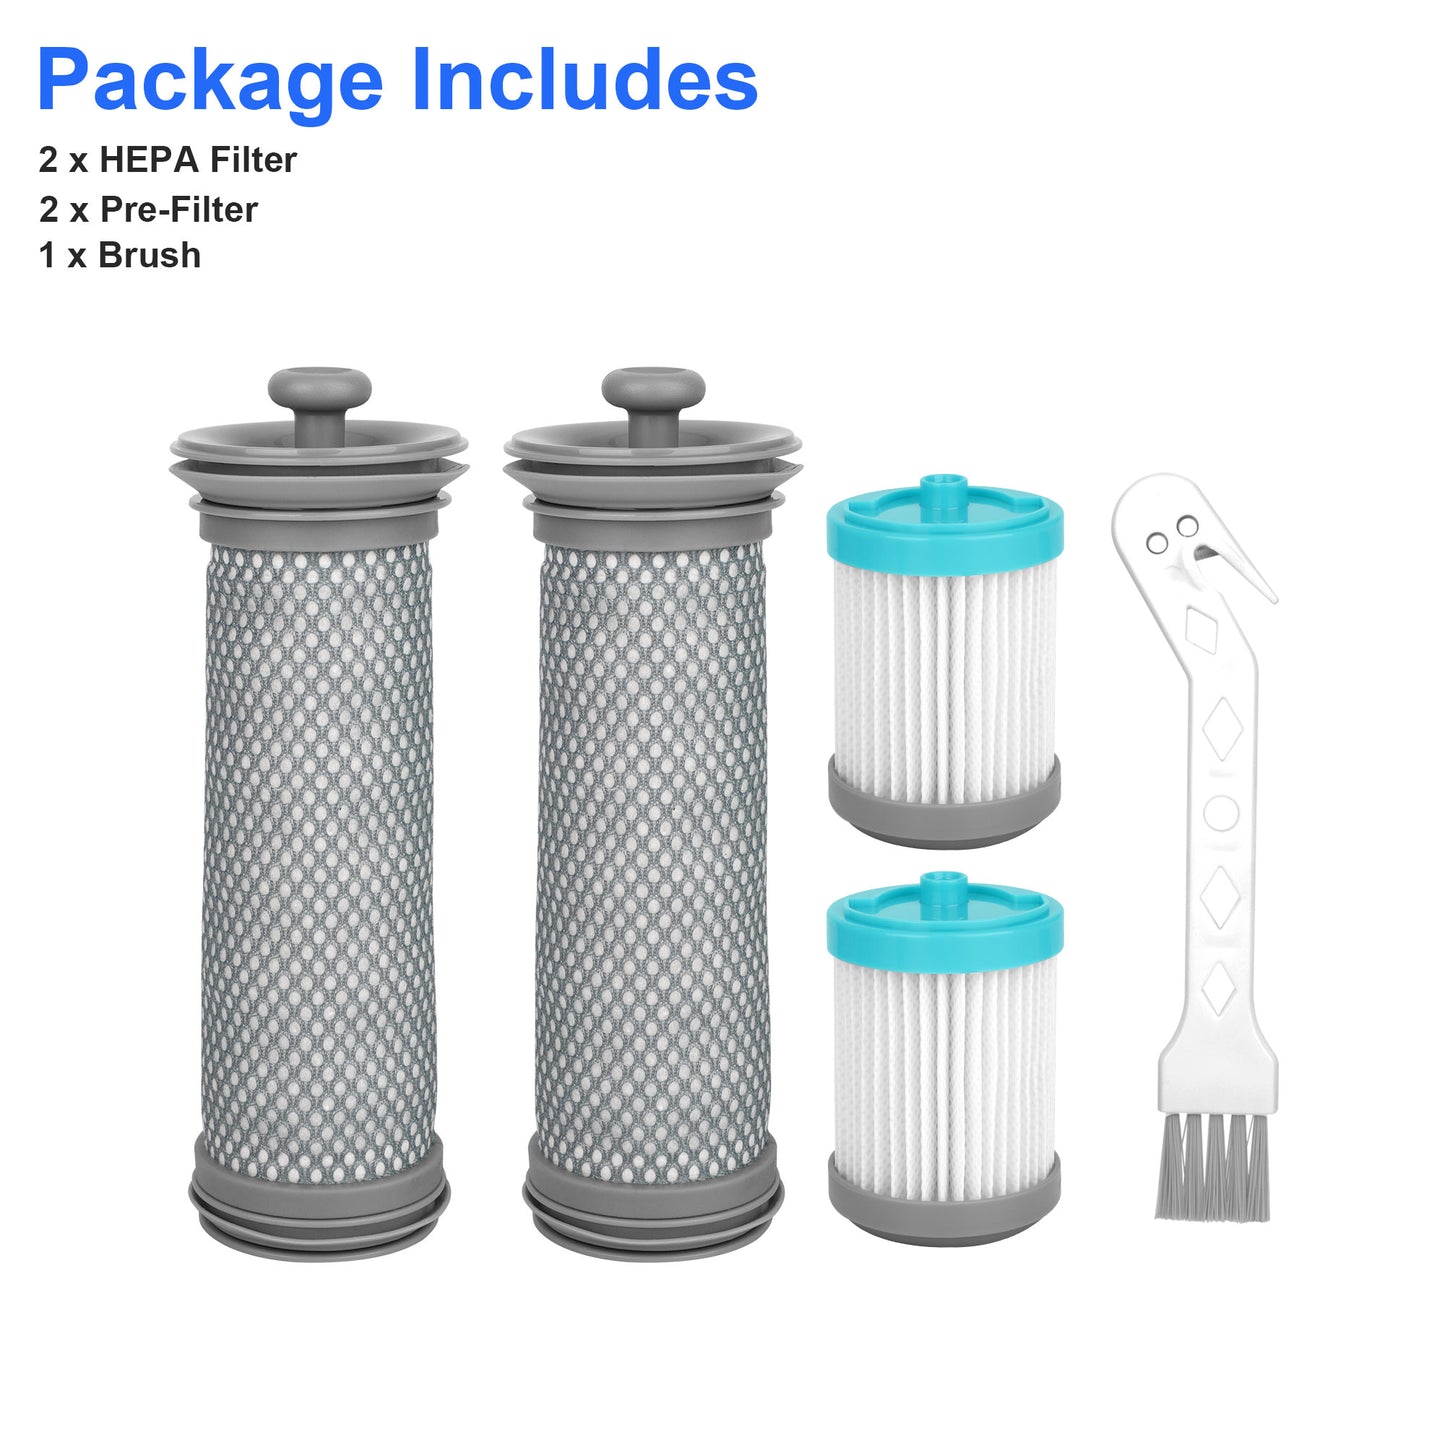 2-Pack Vacuum Pre-Filter and HEPA Filter Kit for Tineco A10/A11/S11 Series - Maintain Suction Efficiency